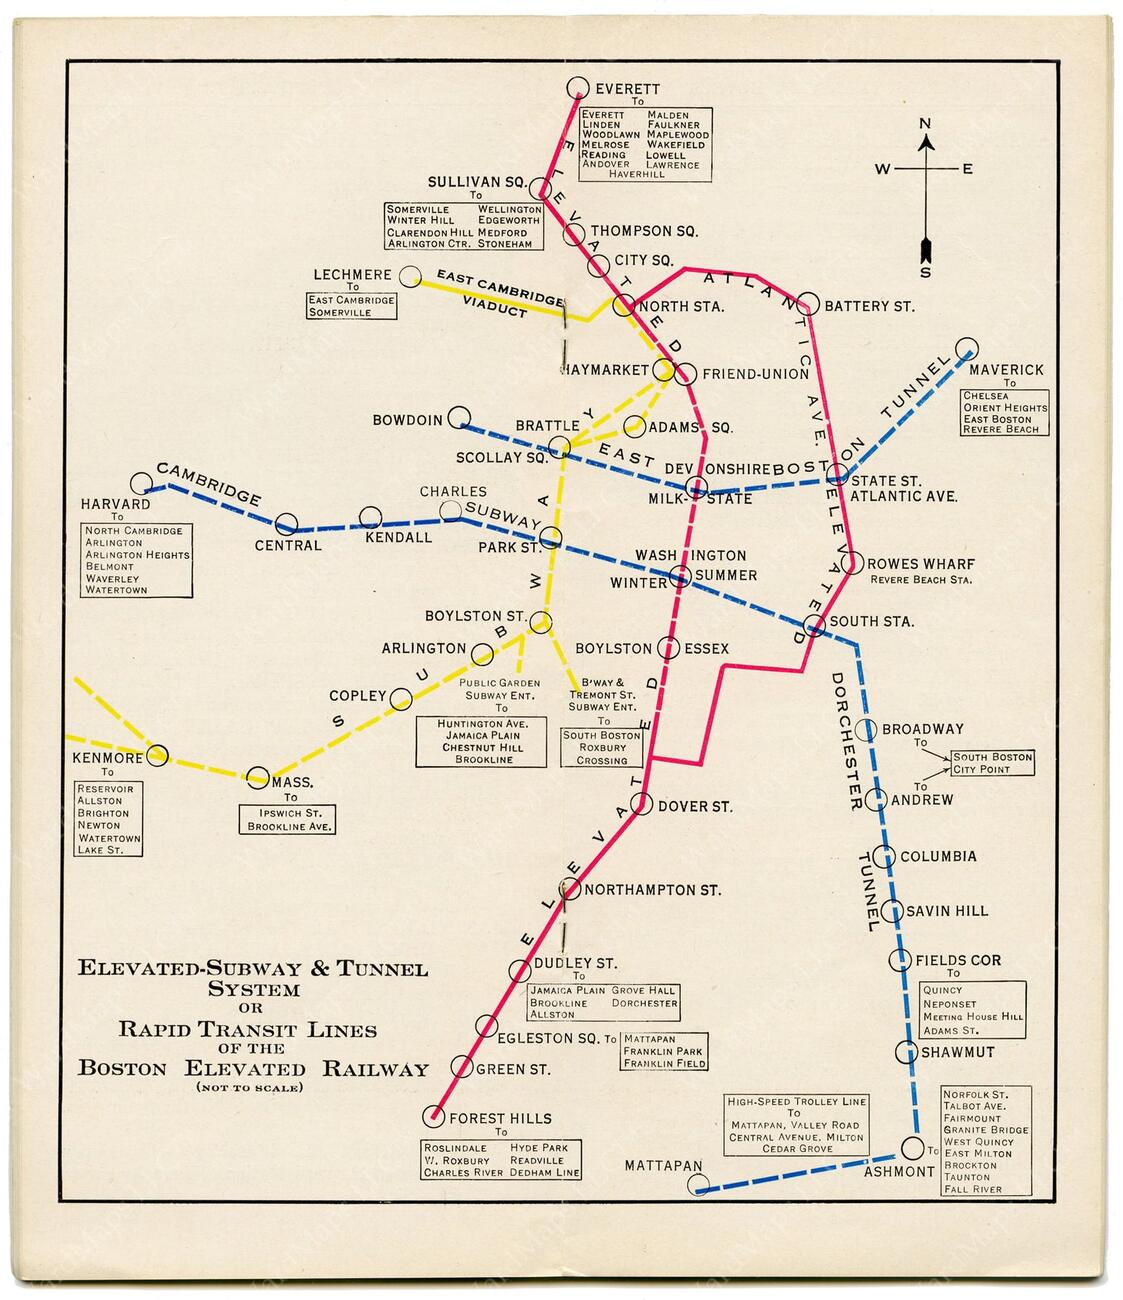 This 1932 line map of the Boston Elevated Railway Company's elevated subway and tunnel system shows the rapid transit lines of Greater Boston from Everett at top to Forest Hills at bottom on one line (here in red), from Cambridge to Mattapan on a second line (in blue), from Bowdoin to Maverick on a third line (also blue), from Lechmere to Kenmore on a fourth line (in yellow). Colors do not match modern line colors. 